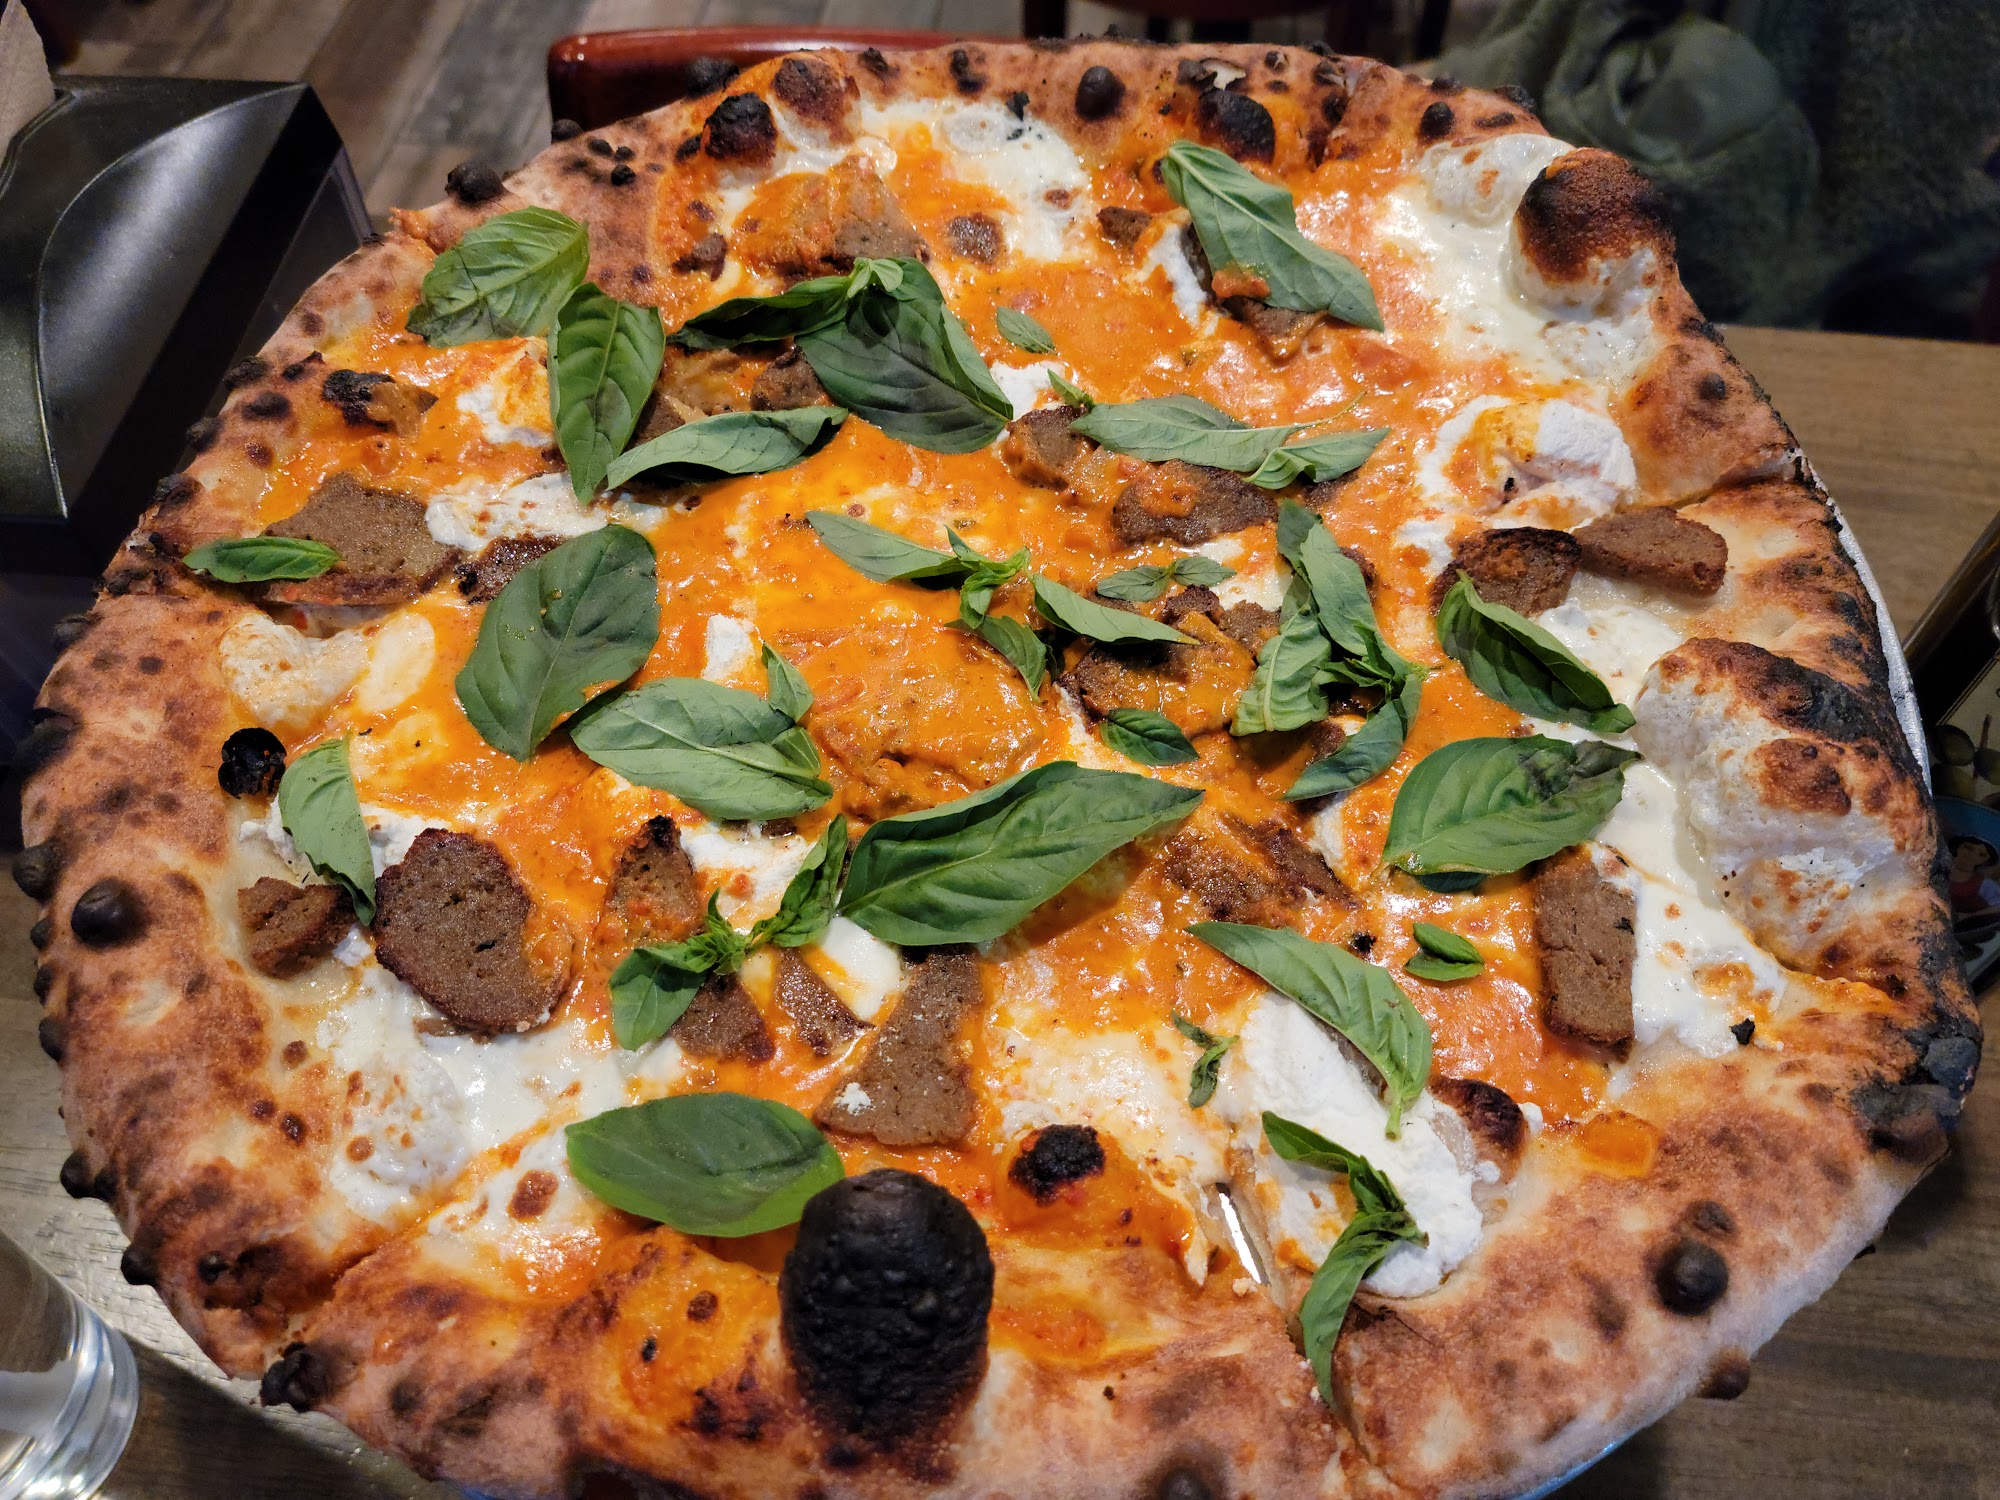 A Legna Wood Fired Pizza